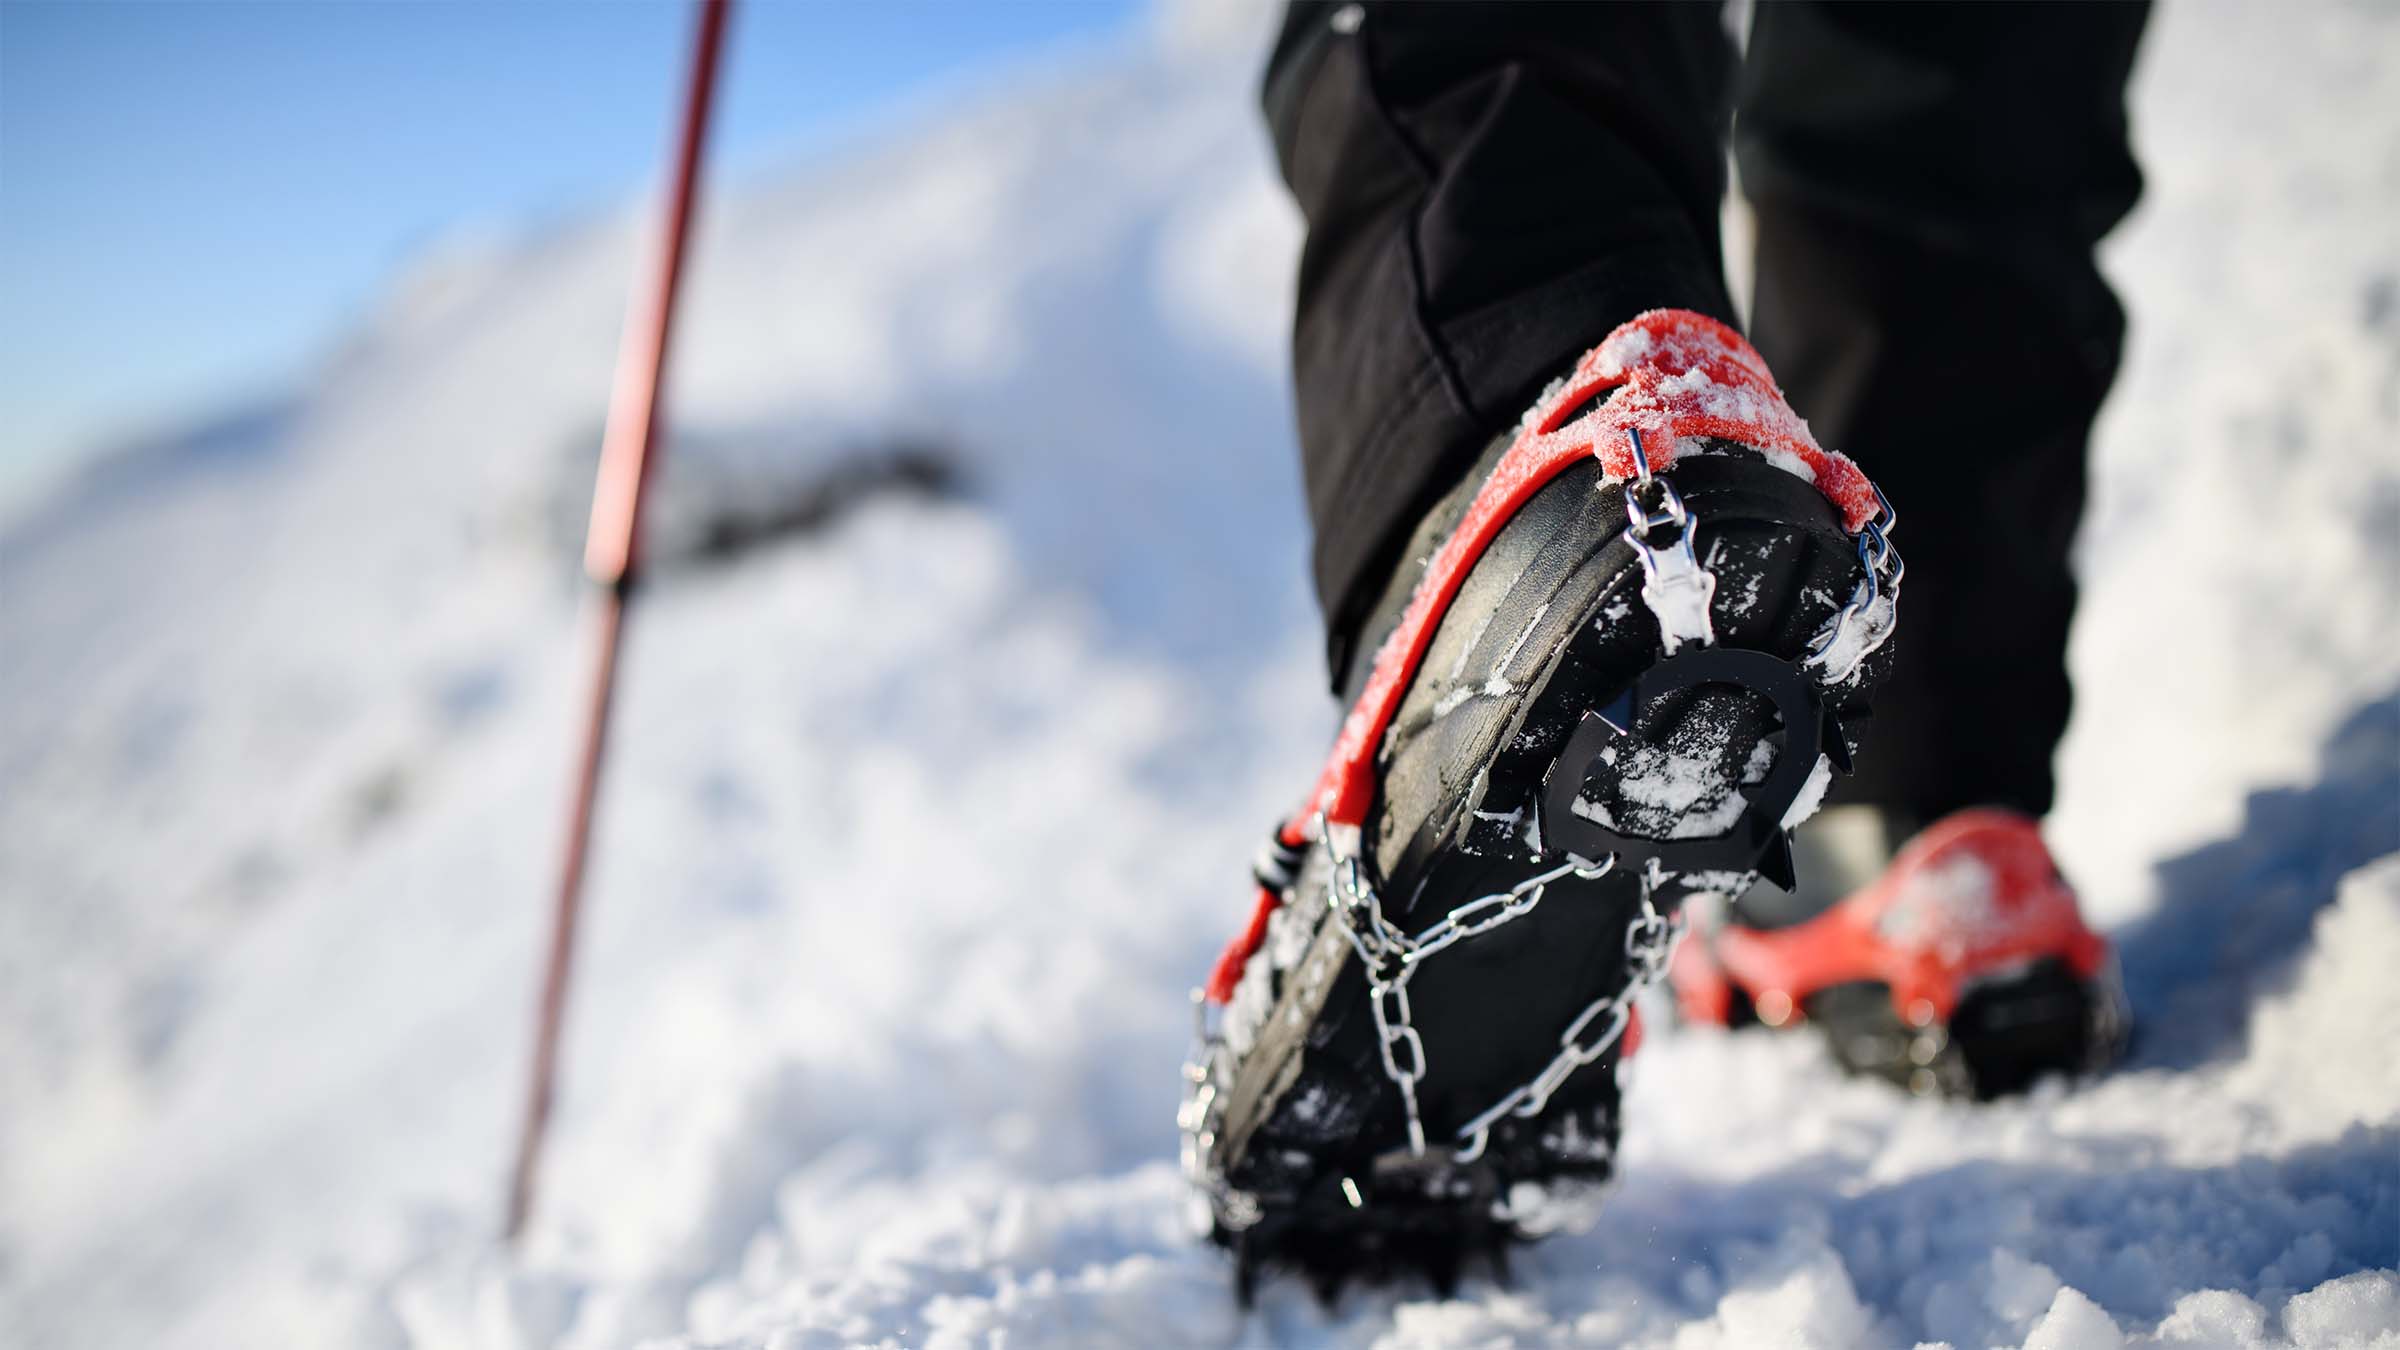 How to Choose Between Microspikes, Crampons, and Snowshoes for Winter Hikes  - Backpacker